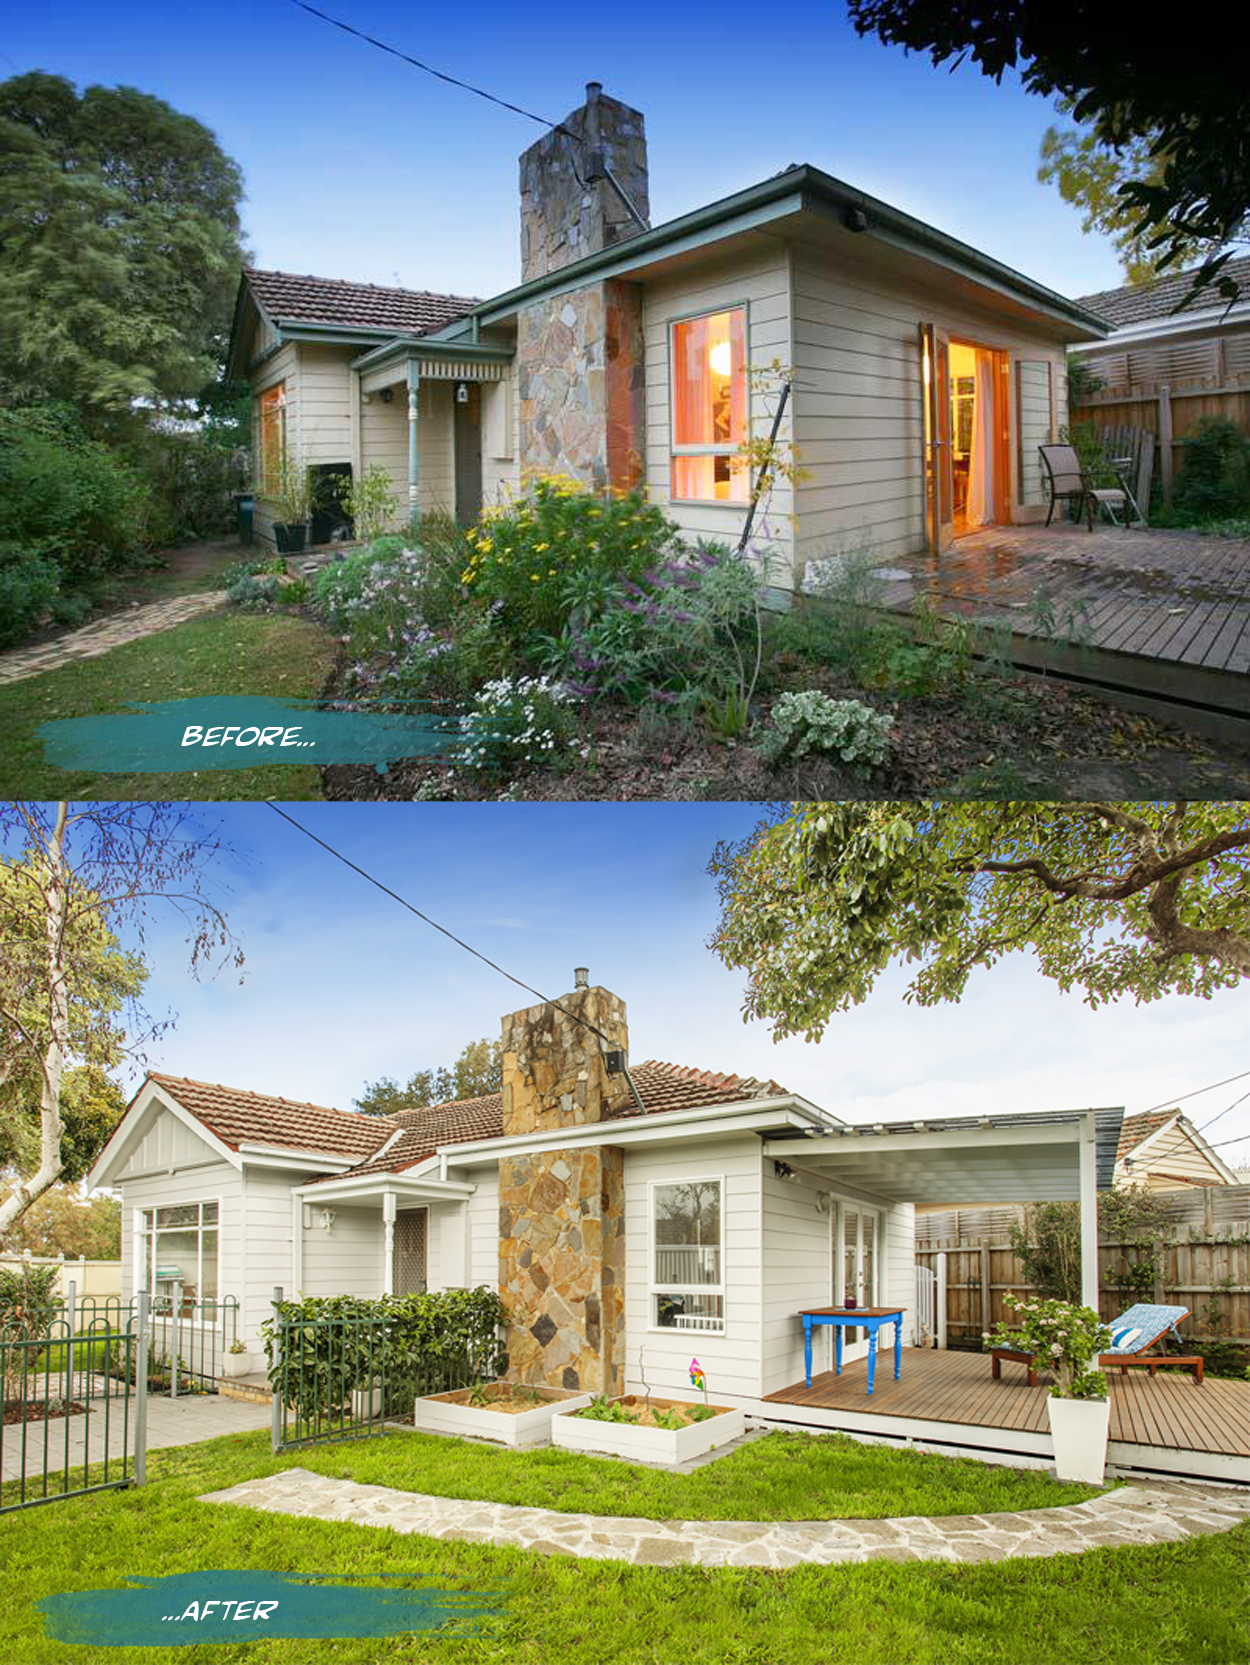 Home exterior before and after on Romona Sandon Designs blog. #interiors #beforeandafter #styling #exterior #home